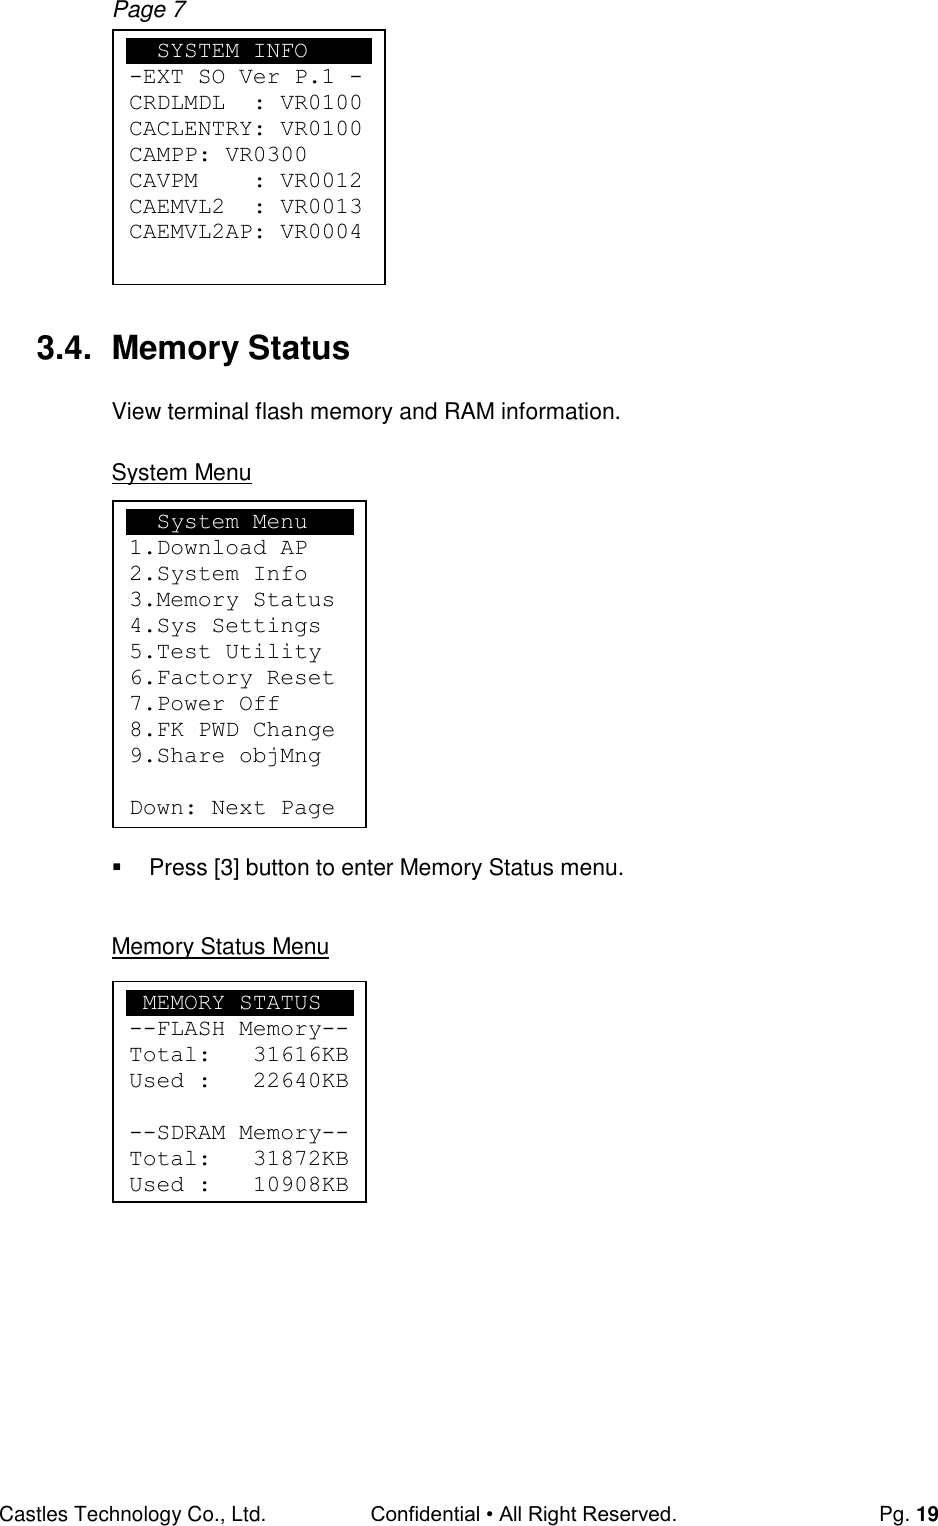 Castles Technology Co., Ltd. Confidential • All Right Reserved.  Pg. 19 Page 7            3.4.  Memory Status View terminal flash memory and RAM information.  System Menu            Press [3] button to enter Memory Status menu.  Memory Status Menu            SYSTEM INFO -EXT SO Ver P.1 - CRDLMDL  : VR0100 CACLENTRY: VR0100 CAMPP: VR0300 CAVPM    : VR0012 CAEMVL2  : VR0013 CAEMVL2AP: VR0004   System Menu 1.Download AP 2.System Info 3.Memory Status 4.Sys Settings 5.Test Utility 6.Factory Reset 7.Power Off 8.FK PWD Change 9.Share objMng  Down: Next Page    MEMORY STATUS --FLASH Memory-- Total:   31616KB Used :   22640KB  --SDRAM Memory-- Total:   31872KB Used :   10908KB  